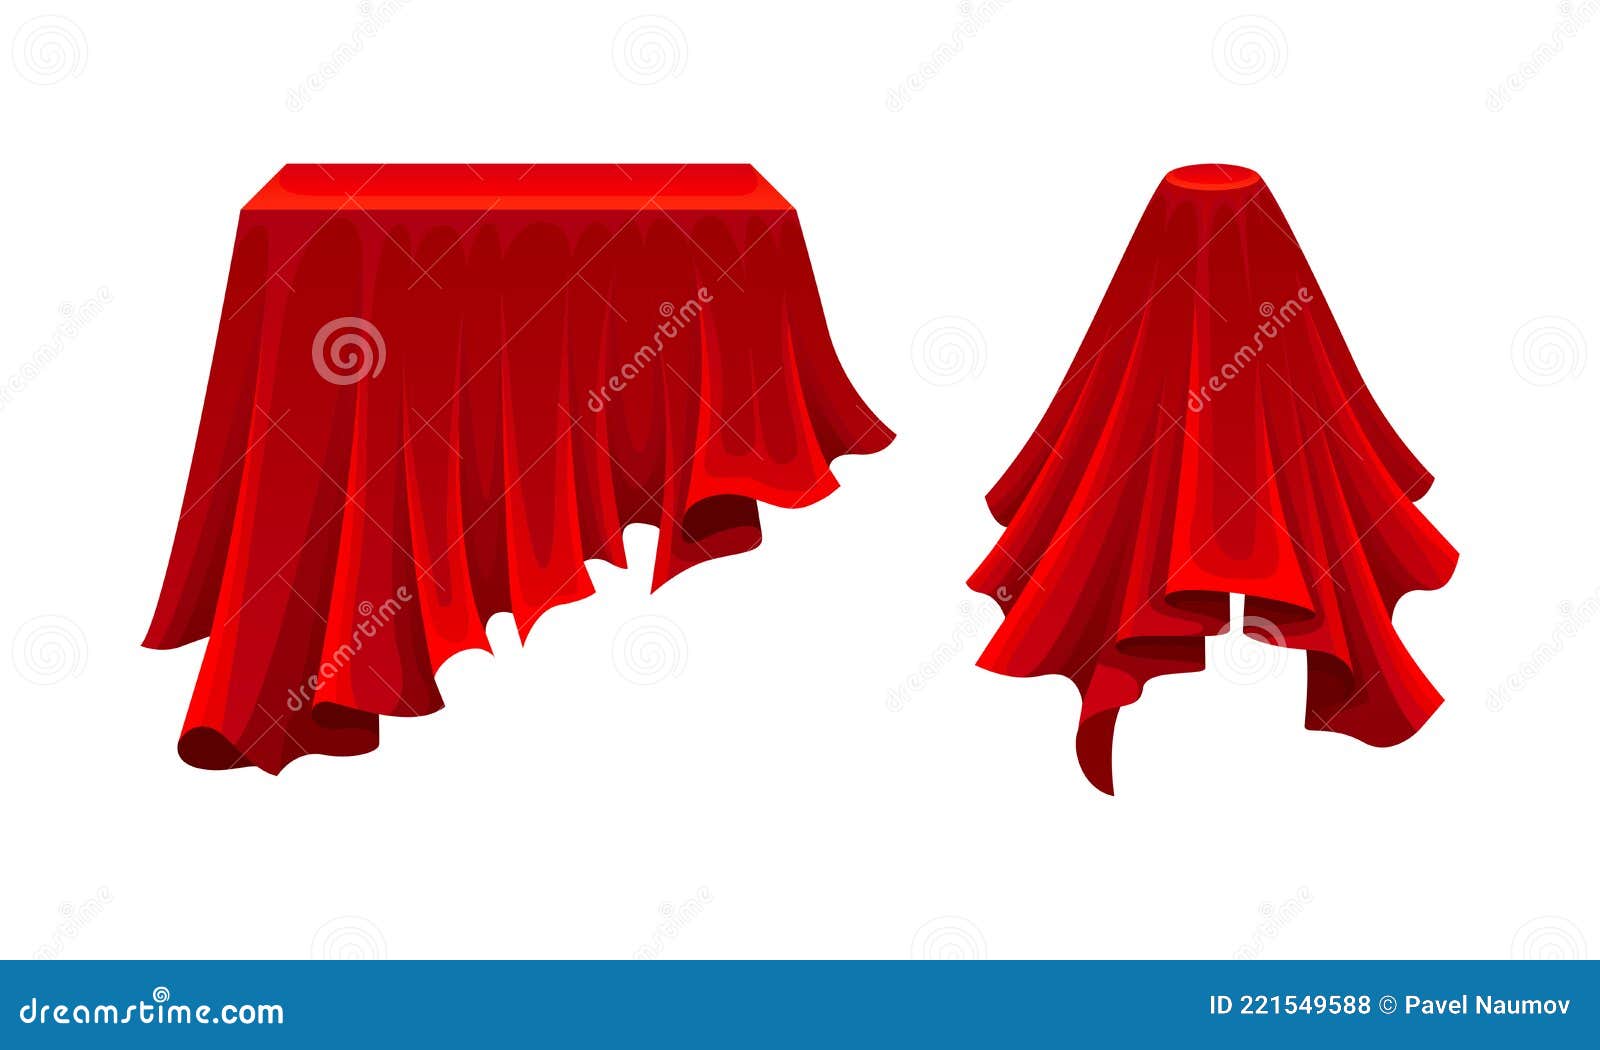 Red Silk Cloth or Smooth Fabric Covering Different Objects Vector Set ...